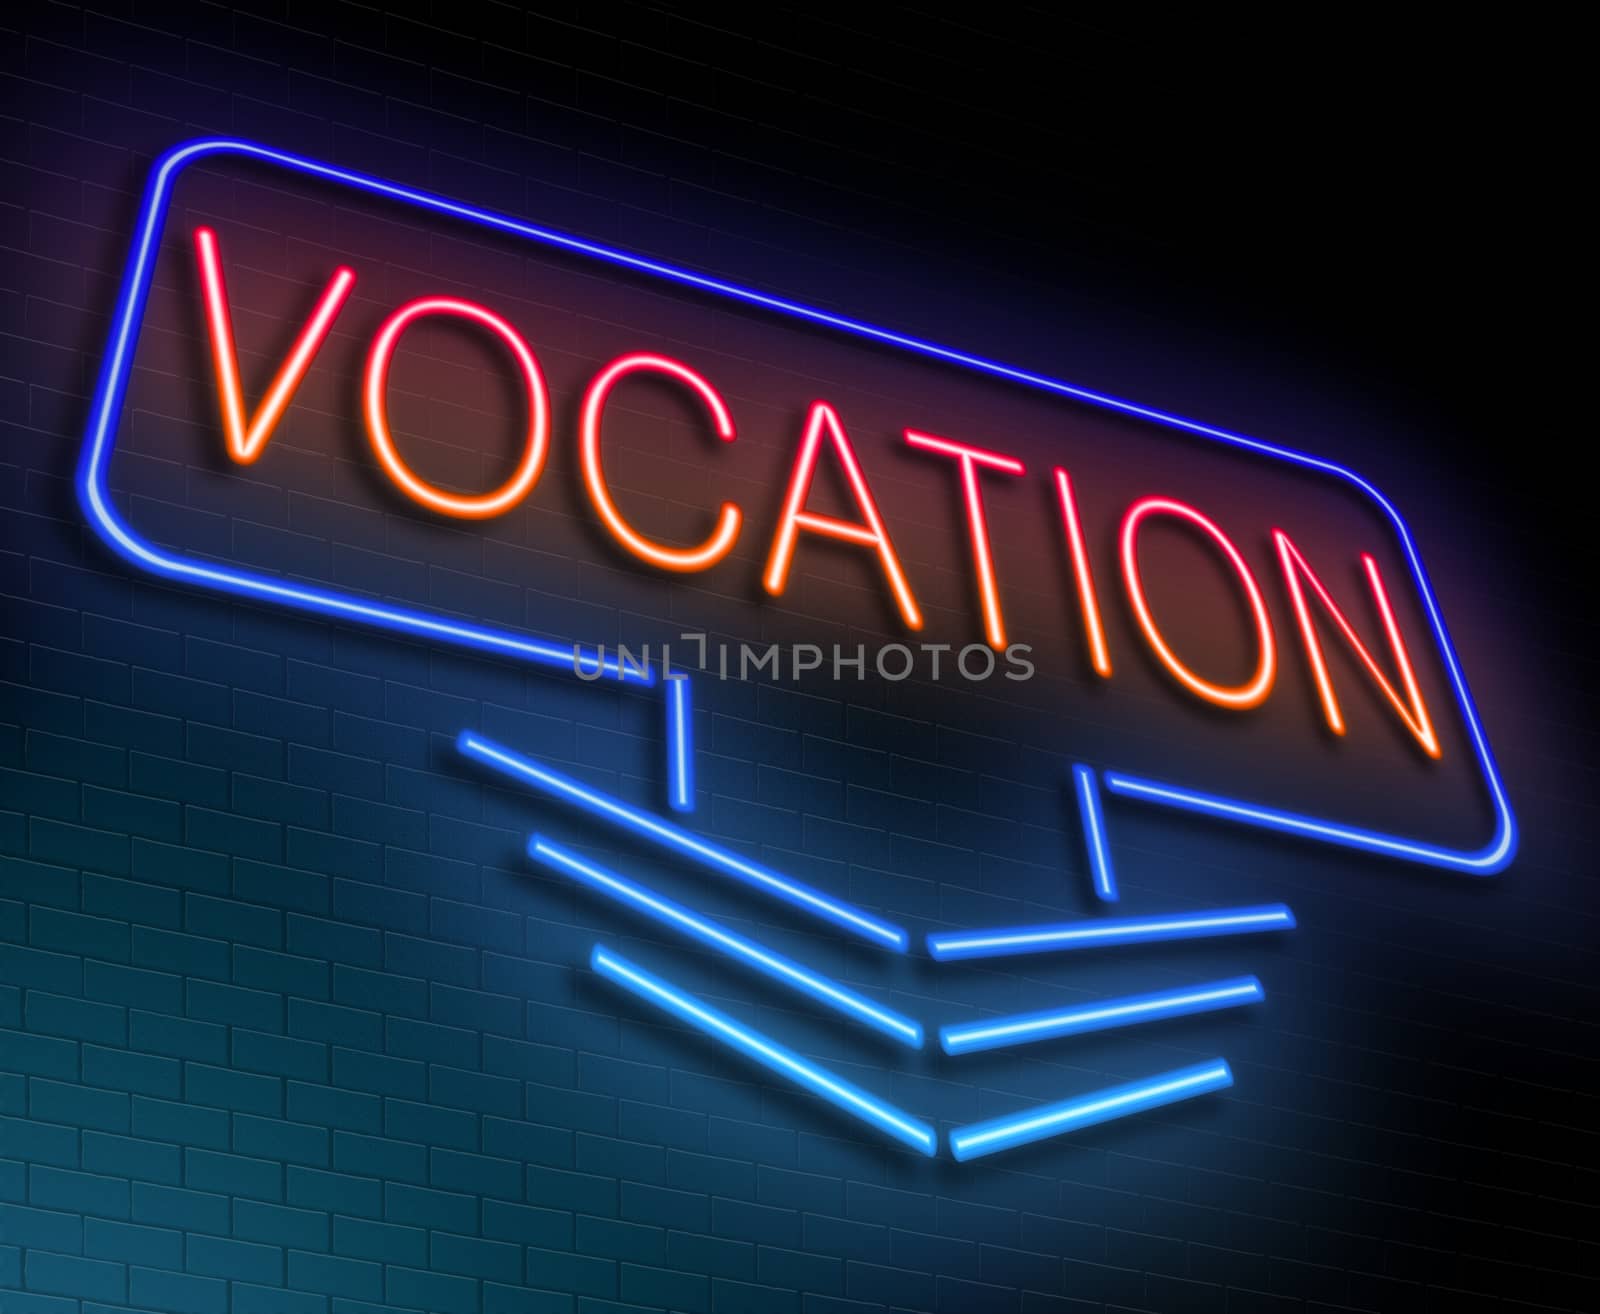 Illustration depicting an illuminated neon sign with a vocation concept.